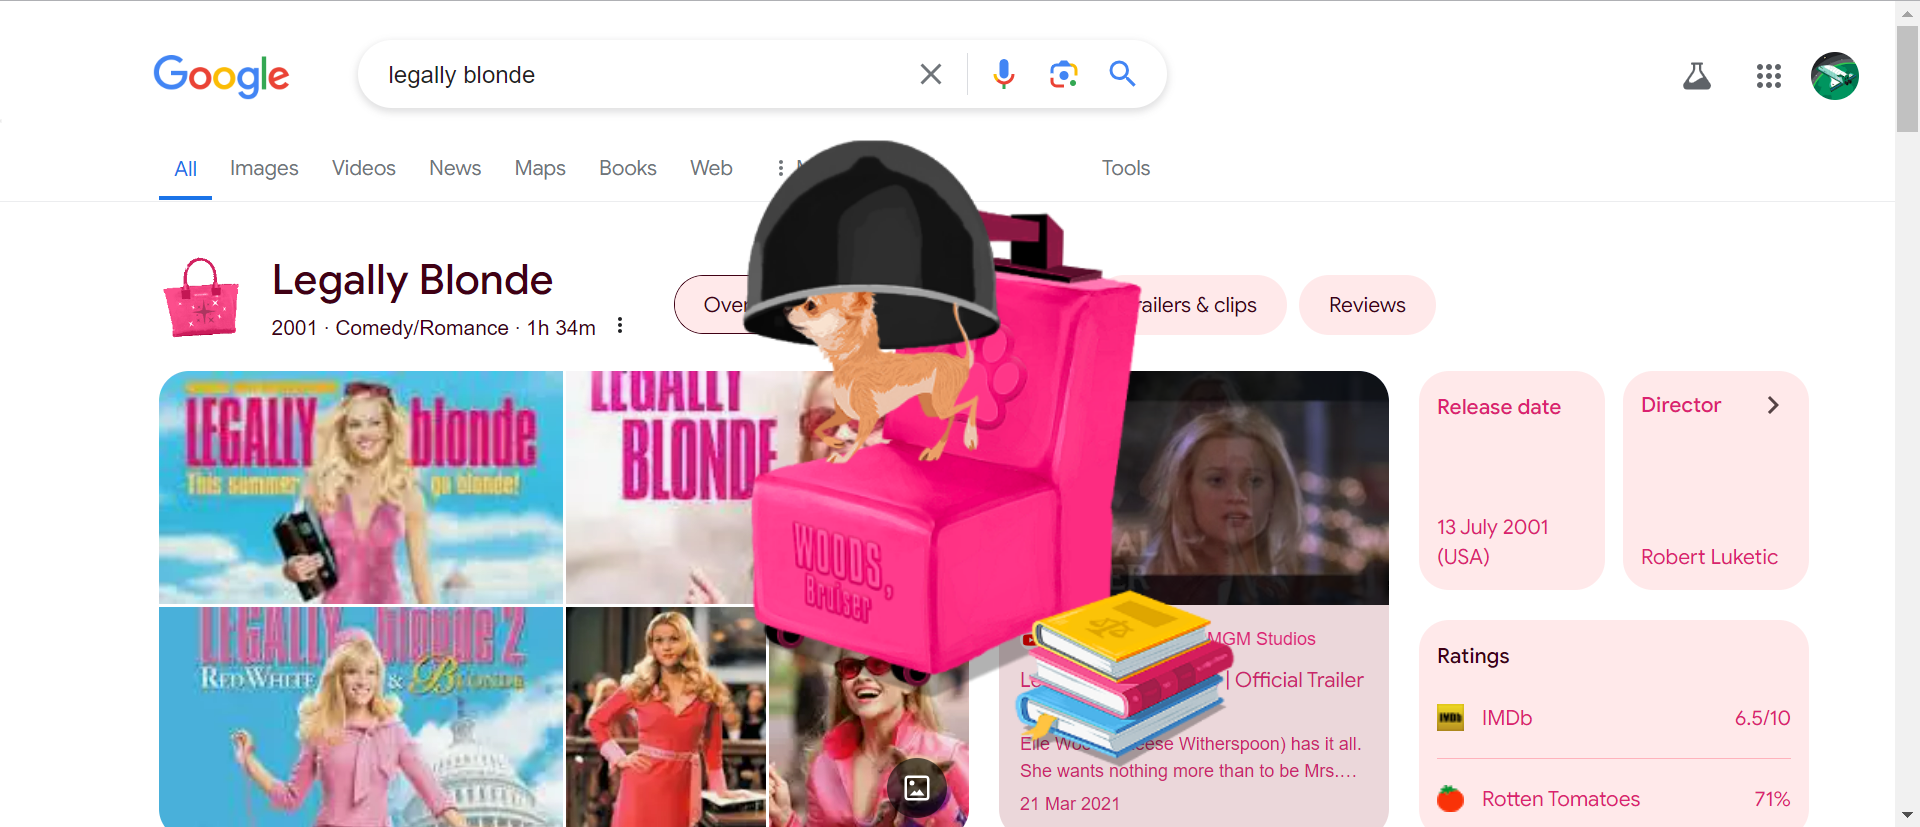 A small dog standing under a hair dryer with the Google search results for legally blonde in the background